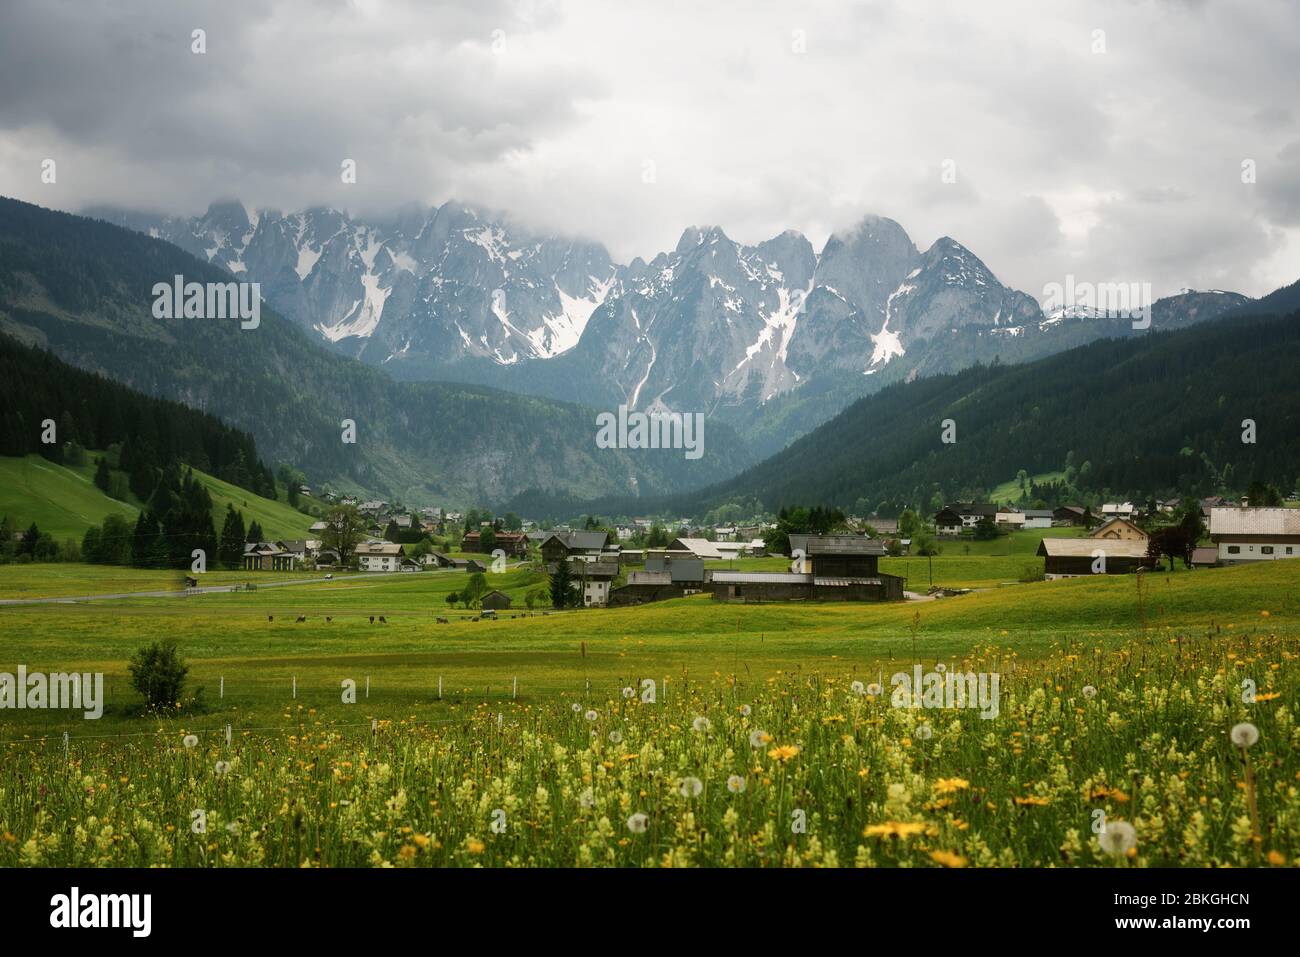 Colorful outdoor scene in the Austrian Alps. Summer sunny day in the Gosau village on the Grosse Bischofsmutze mountain range, Austria, Europe. Stock Photo